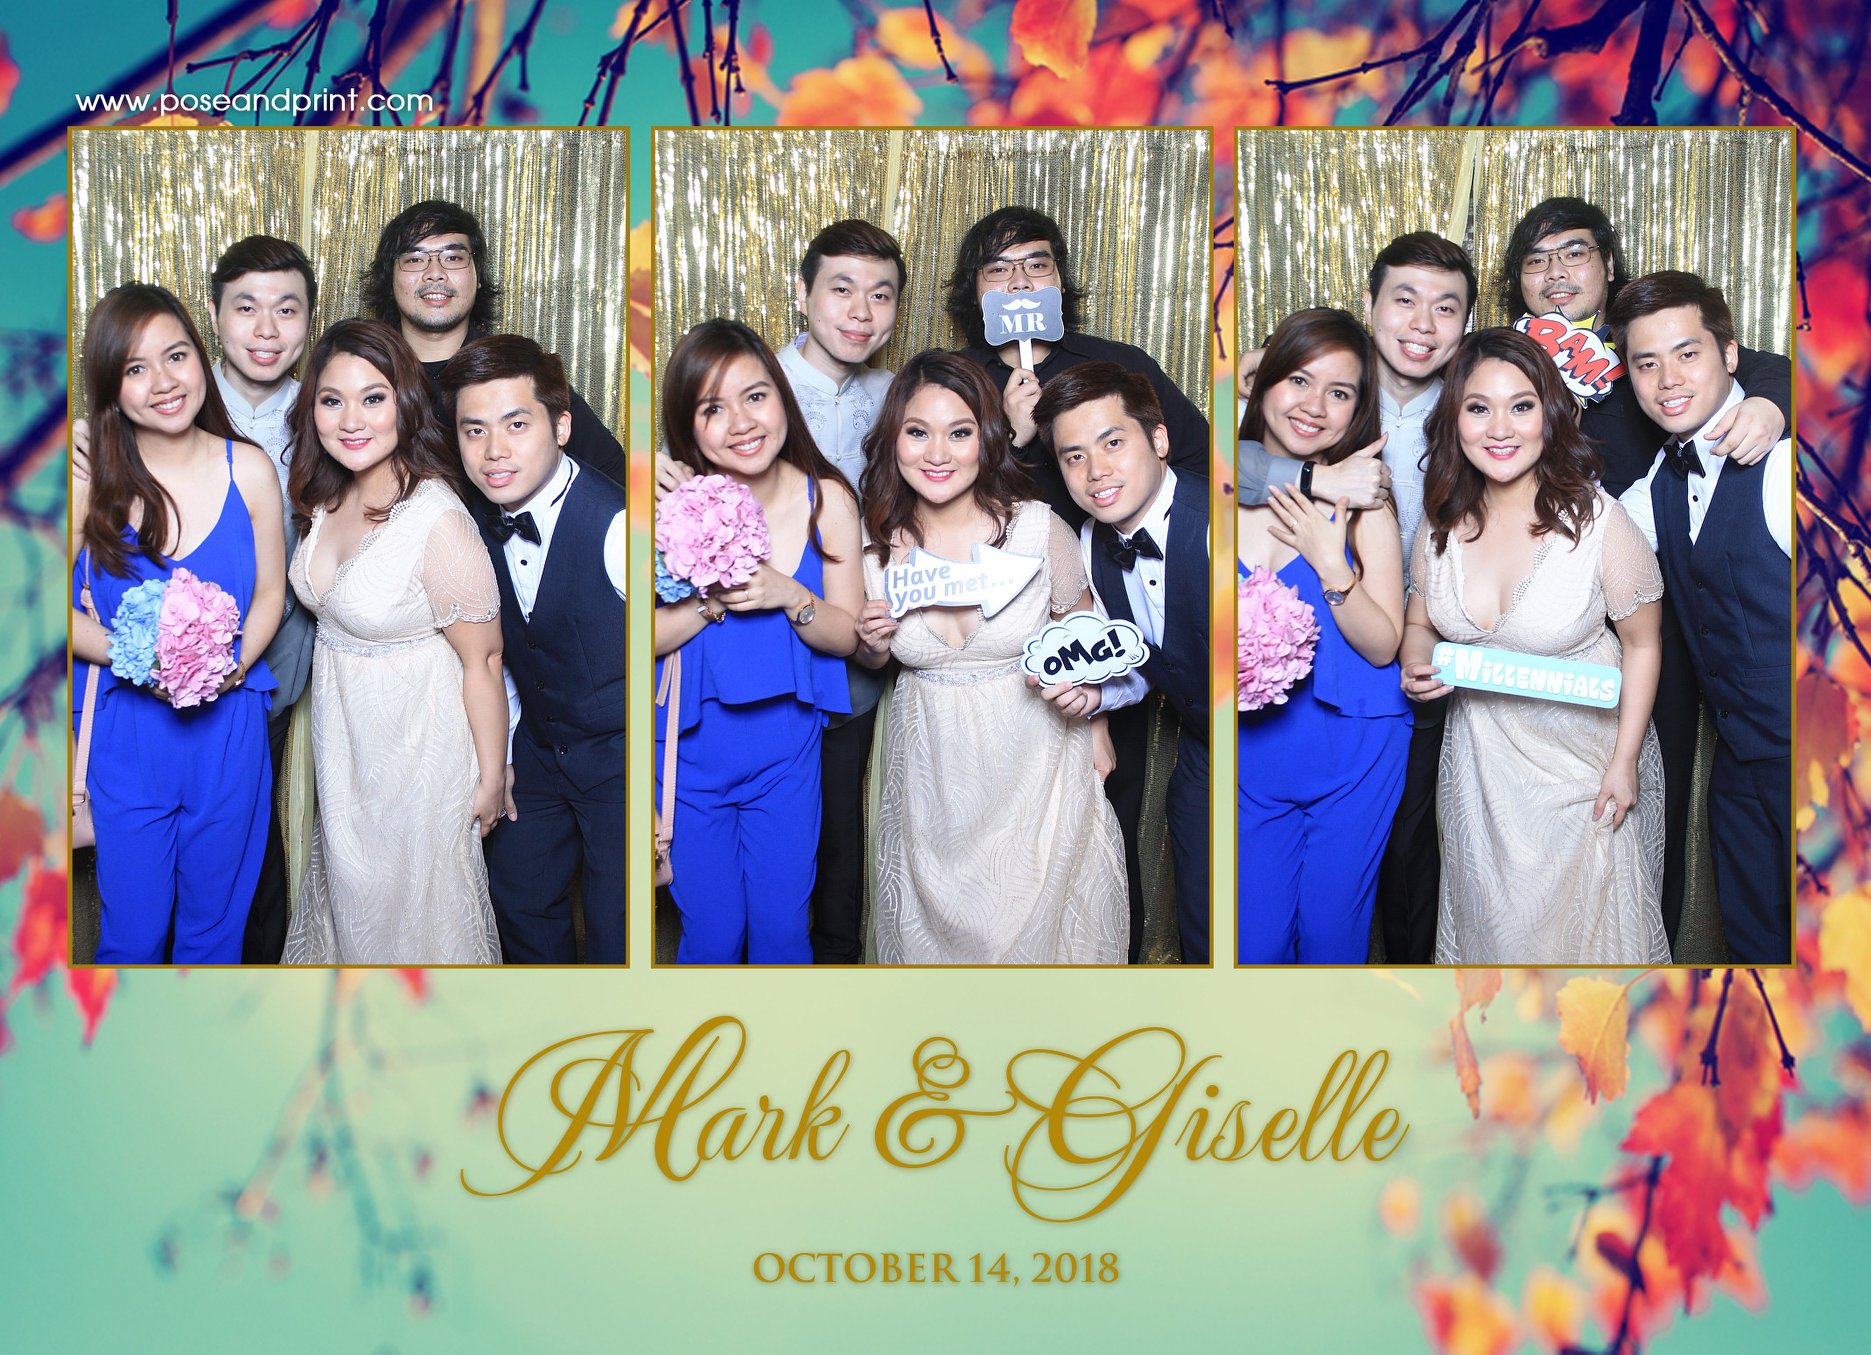 Mark and Giselle’s Wedding – Mirror Booth